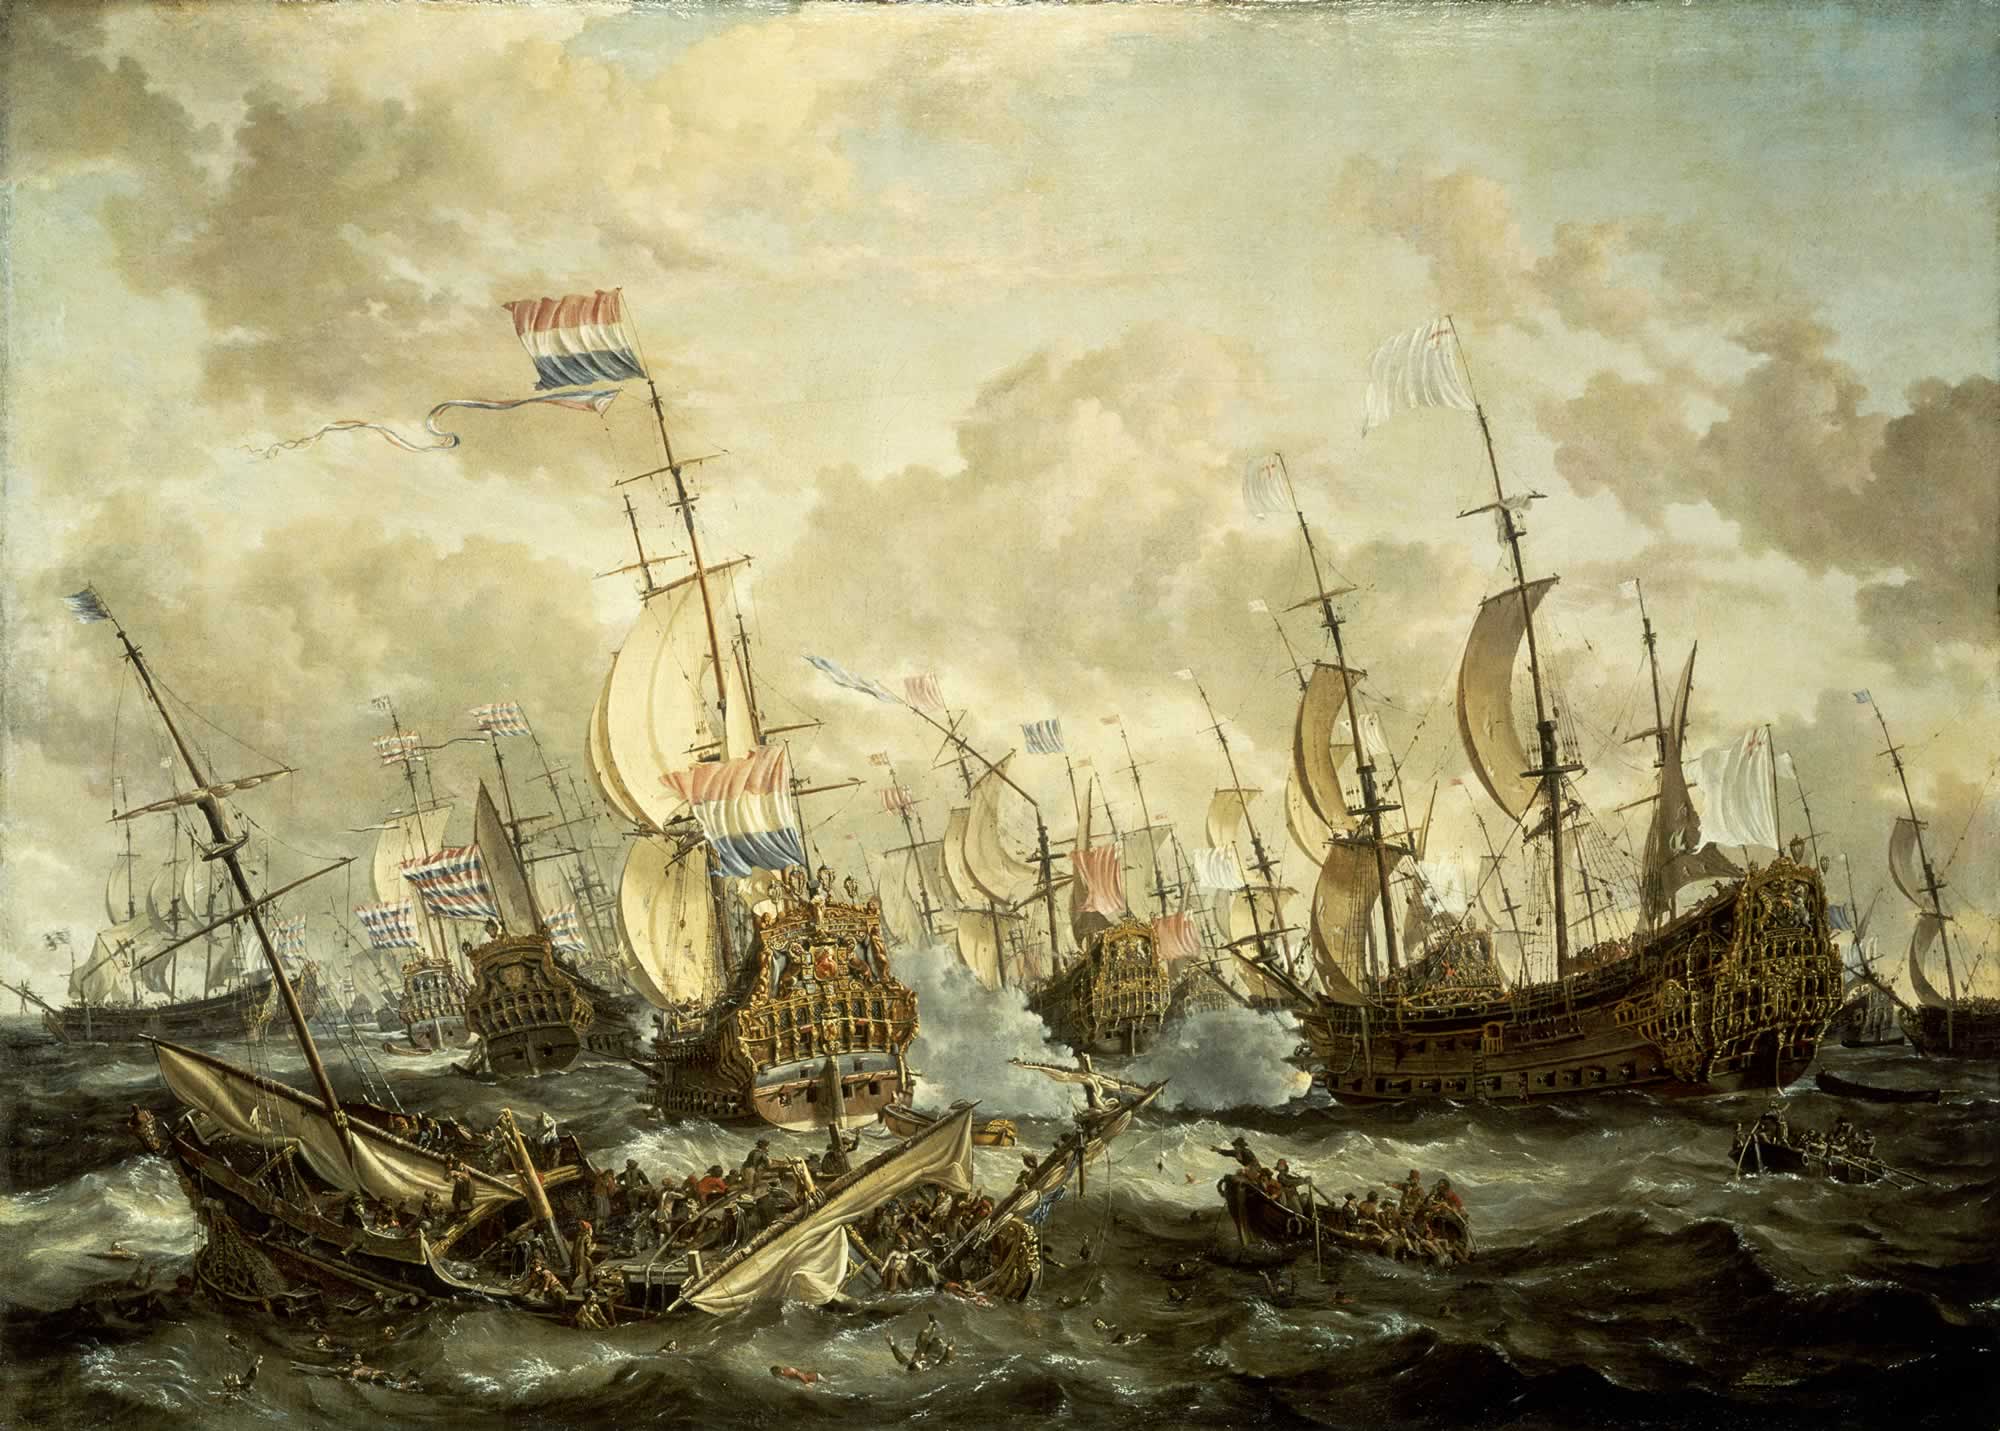 Art History News: The Golden Age of Dutch Seascapes